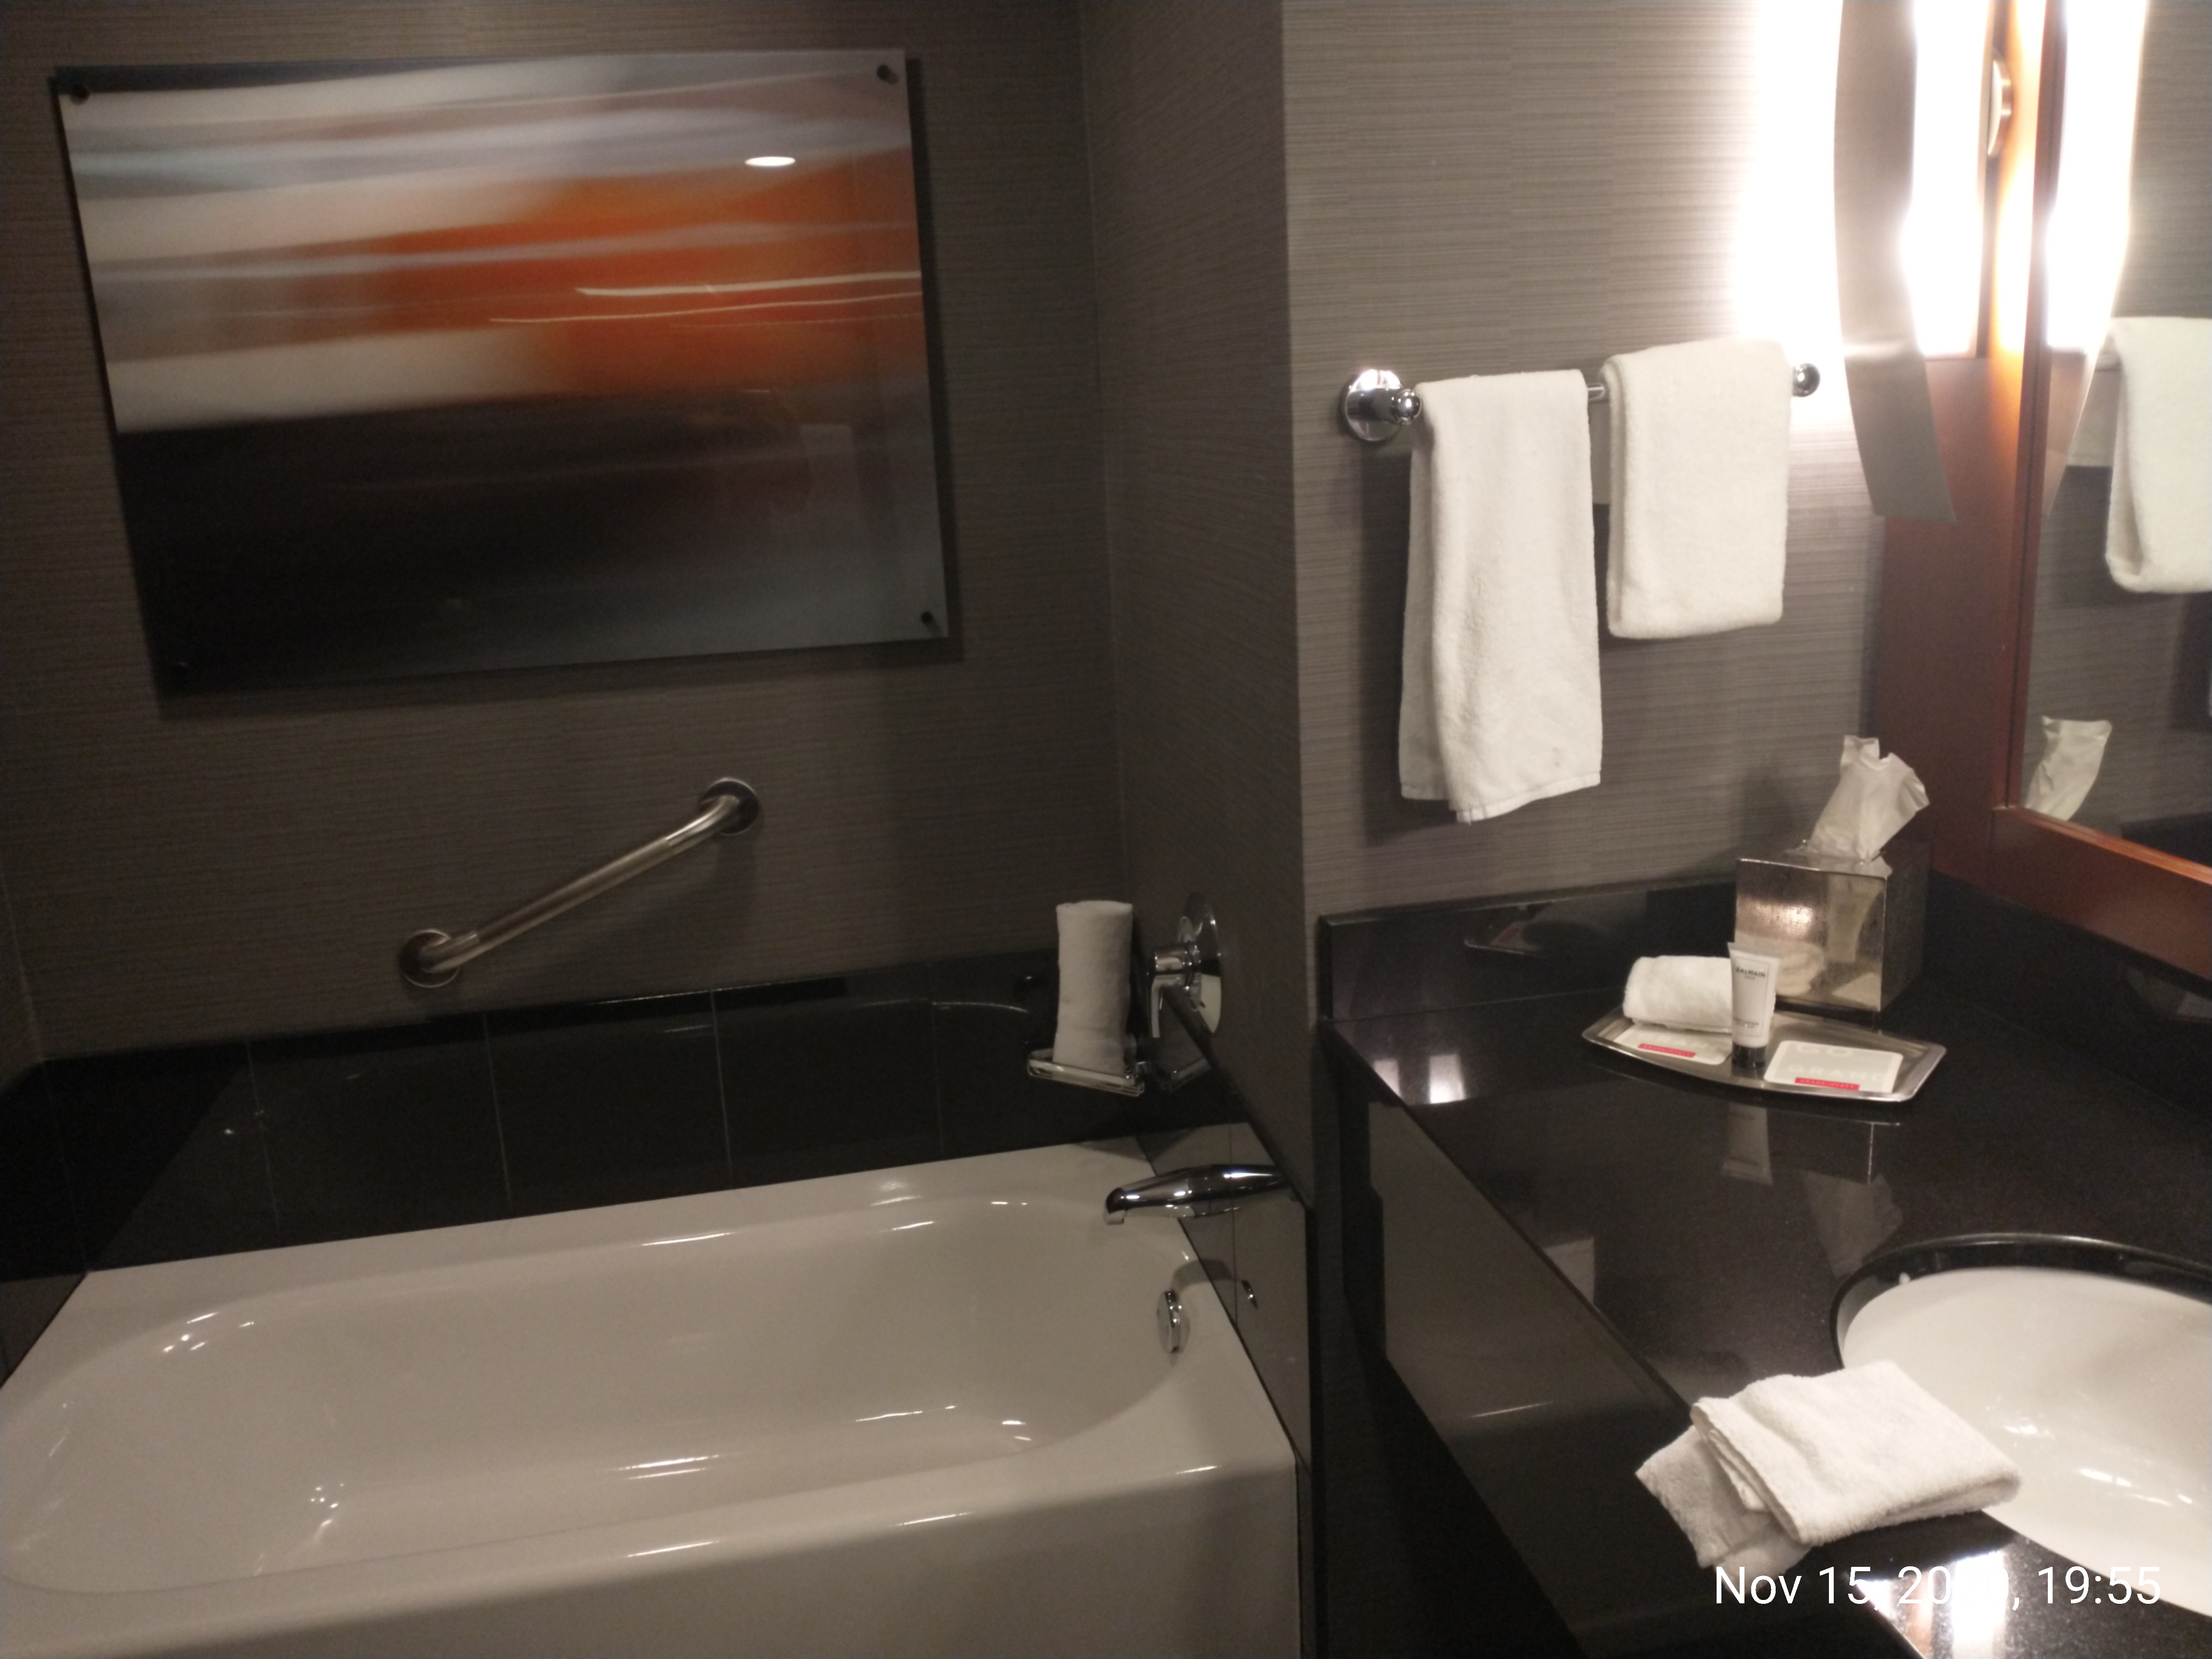 Picture of the bathroom in my suite